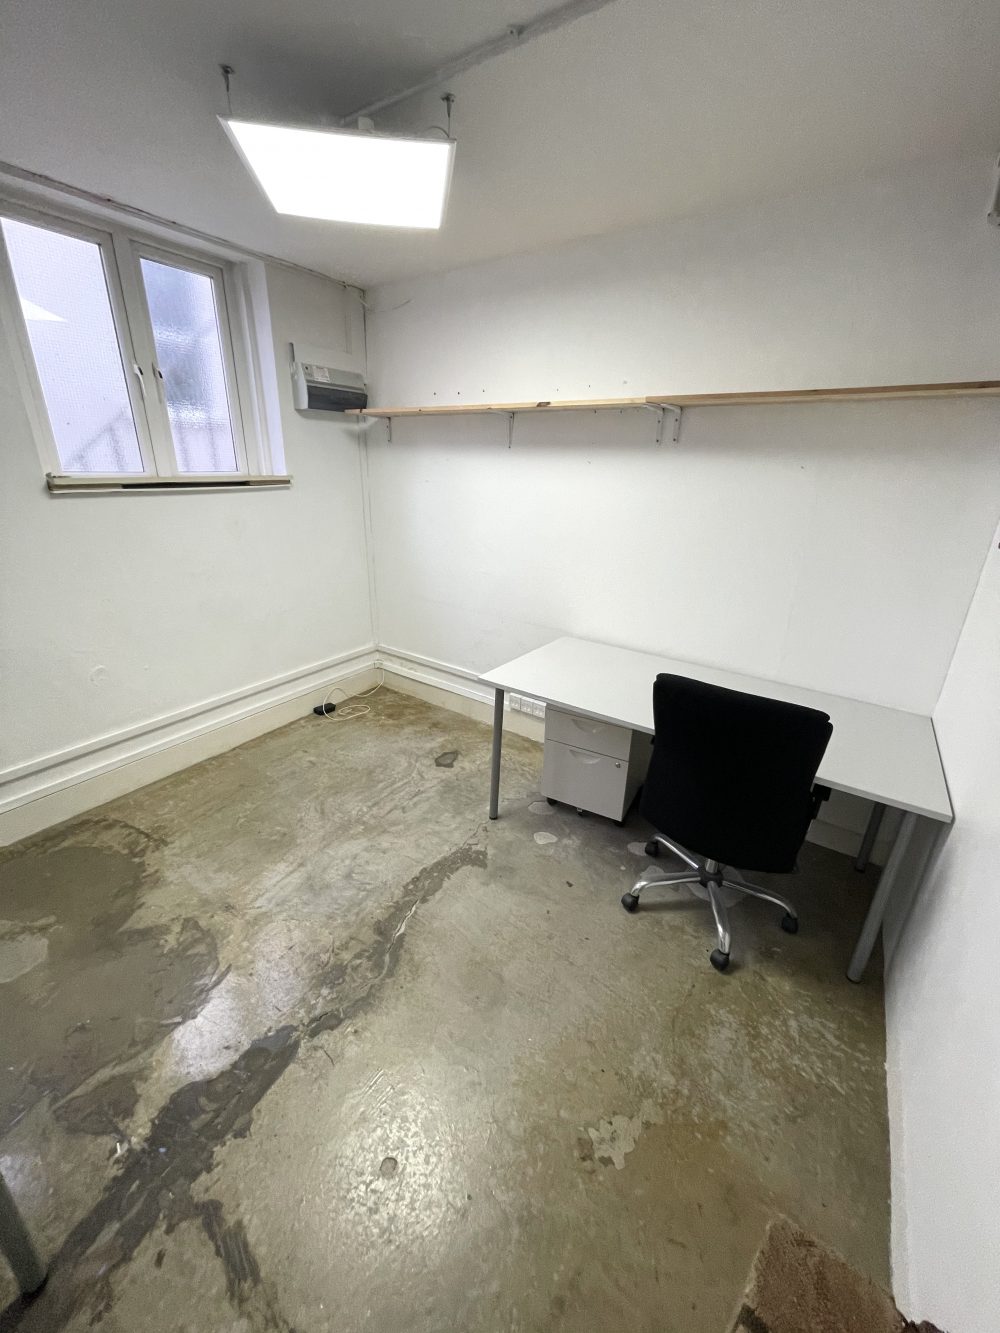 Ground Floor Studio Available to rent in N16 Green Lane Pic10